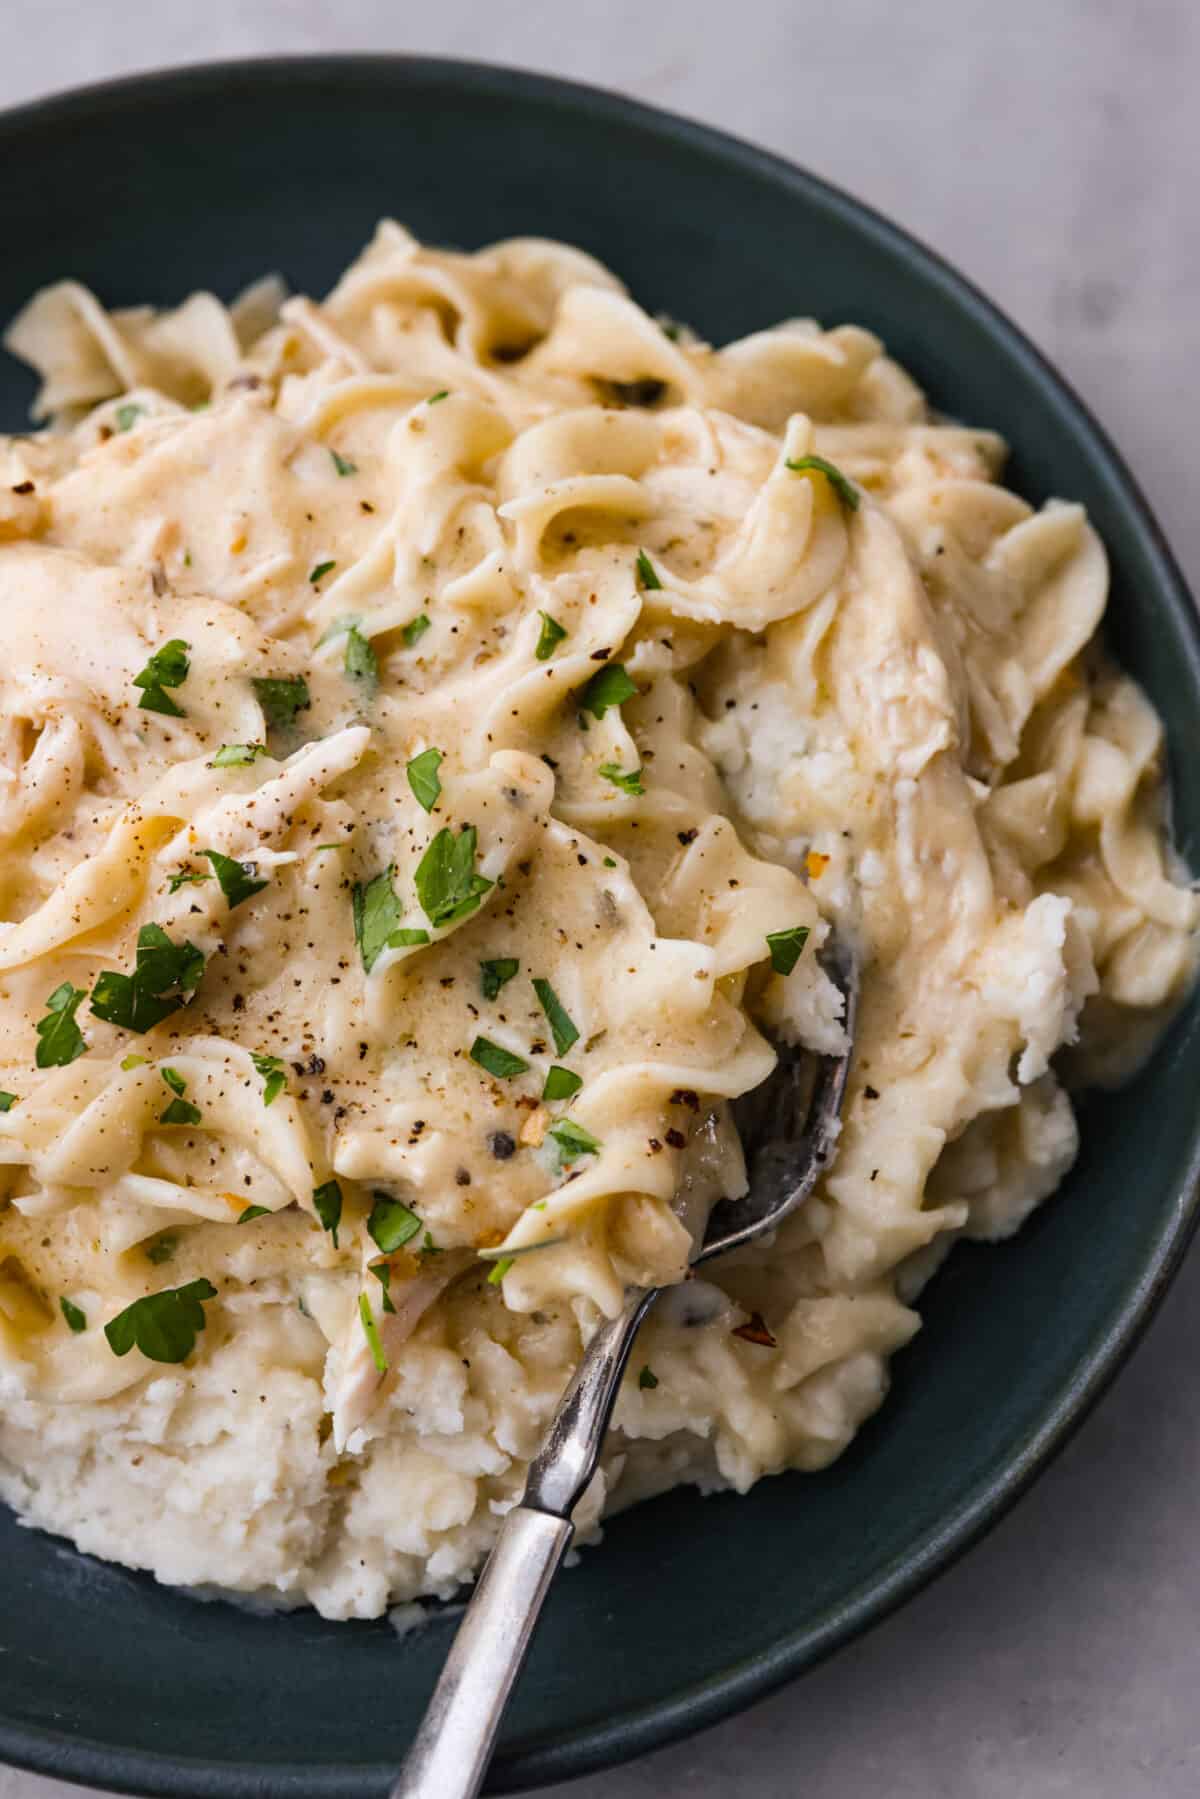 Chicken and pasta served over mashed potatoes.